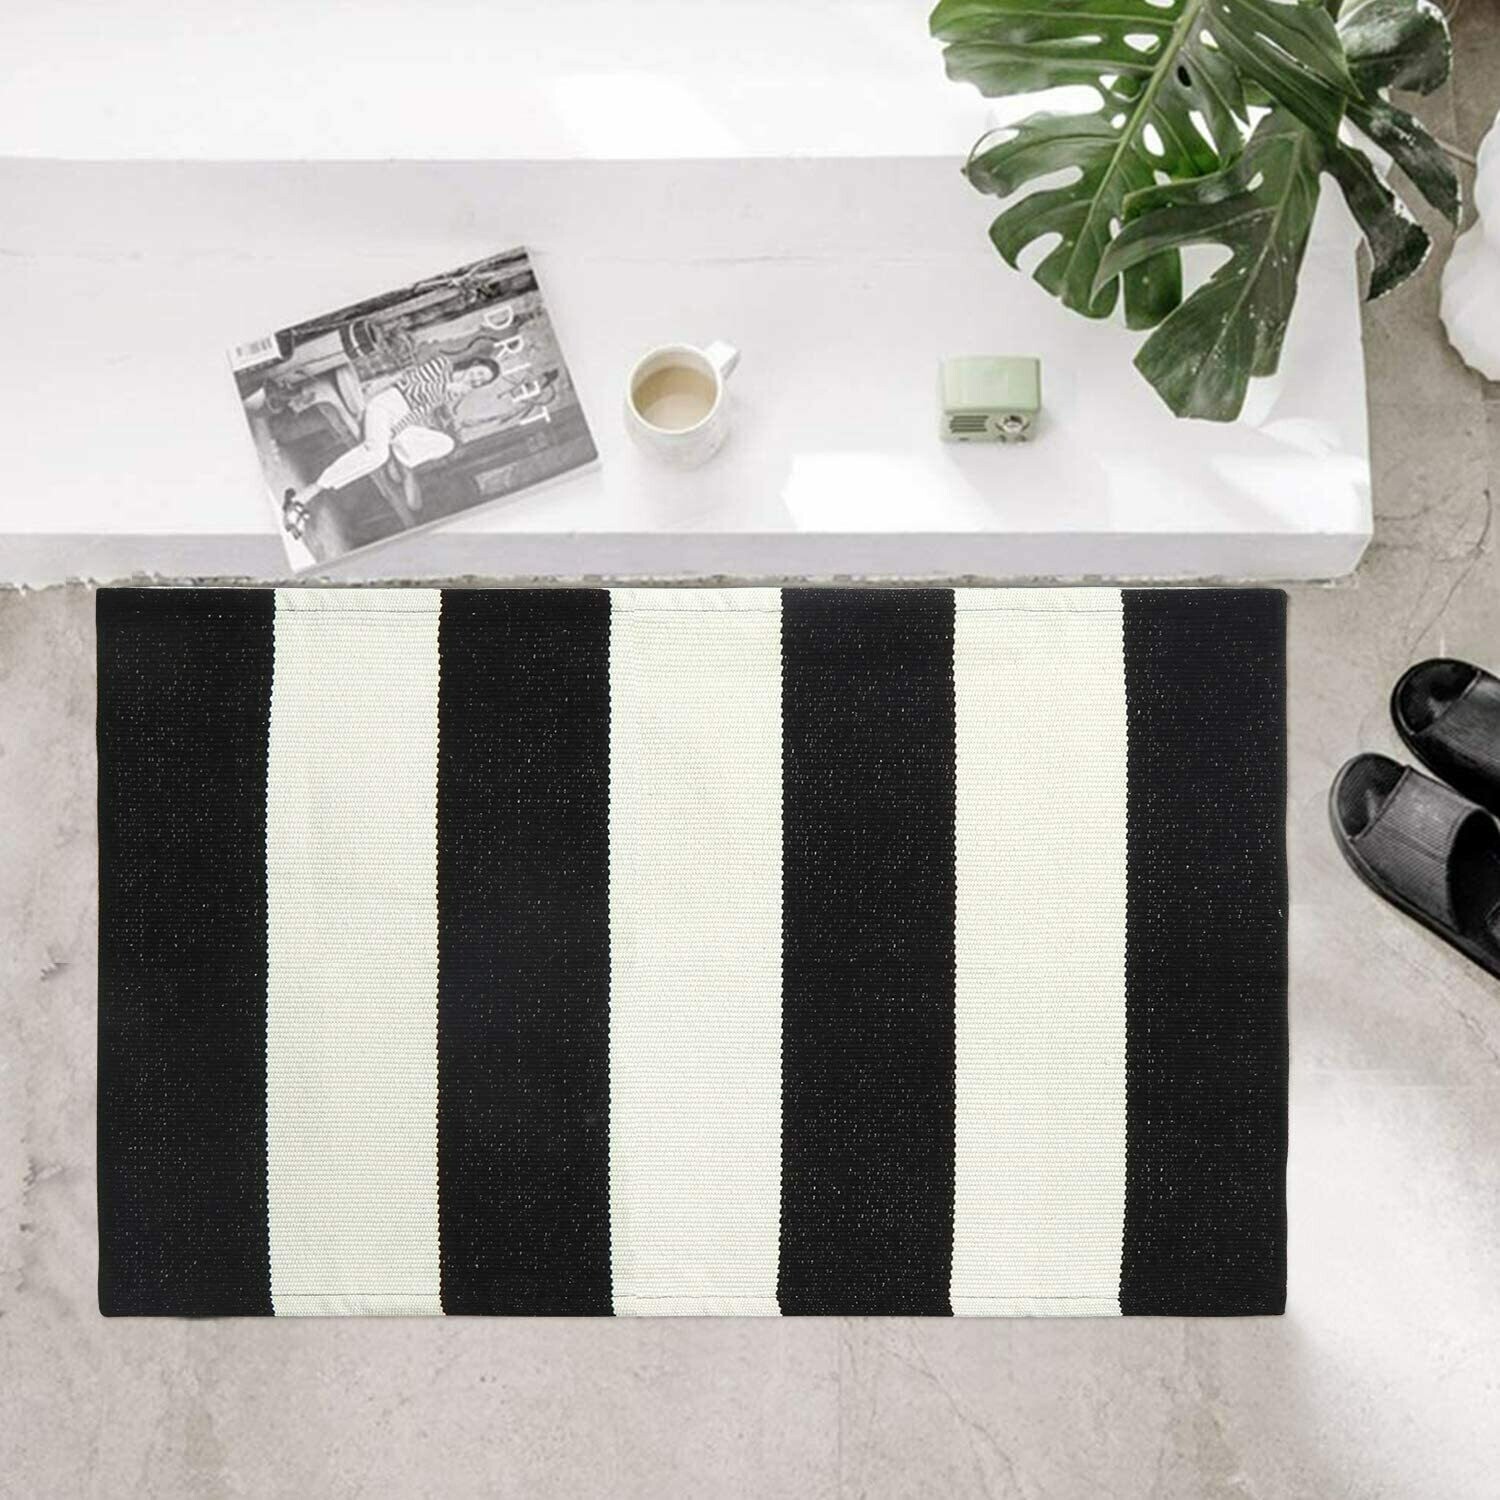 Black and White Striped Rug 18&#39;&#39; x 28&#39;&#39;, Cotton Woven Outdoor Rugs Farmhouse Washable Front Door Mat for Layered Door Mats/Porch/Kitchen/Bathroom/Laundry Room